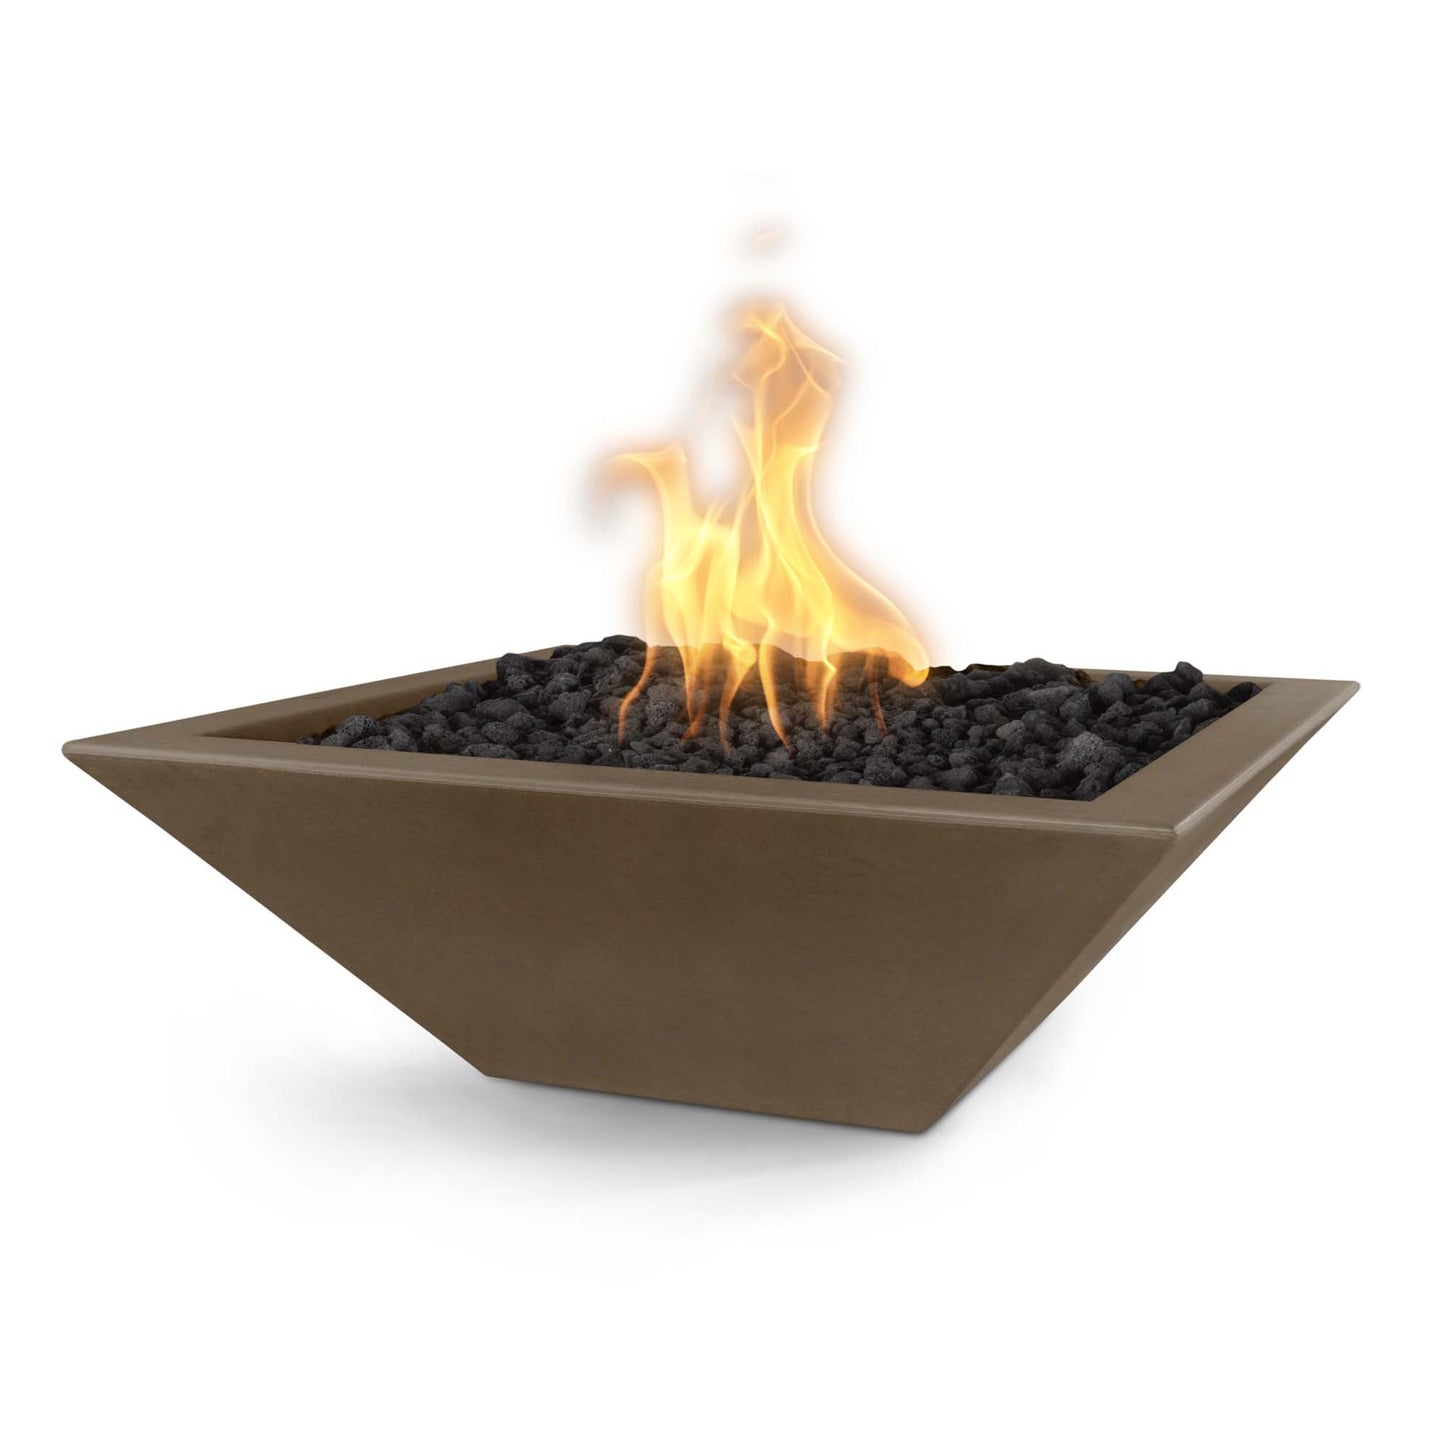 The Outdoor Plus Square Maya 30" White GFRC Concrete Natural Gas Fire Bowl with Match Lit with Flame Sense Ignition